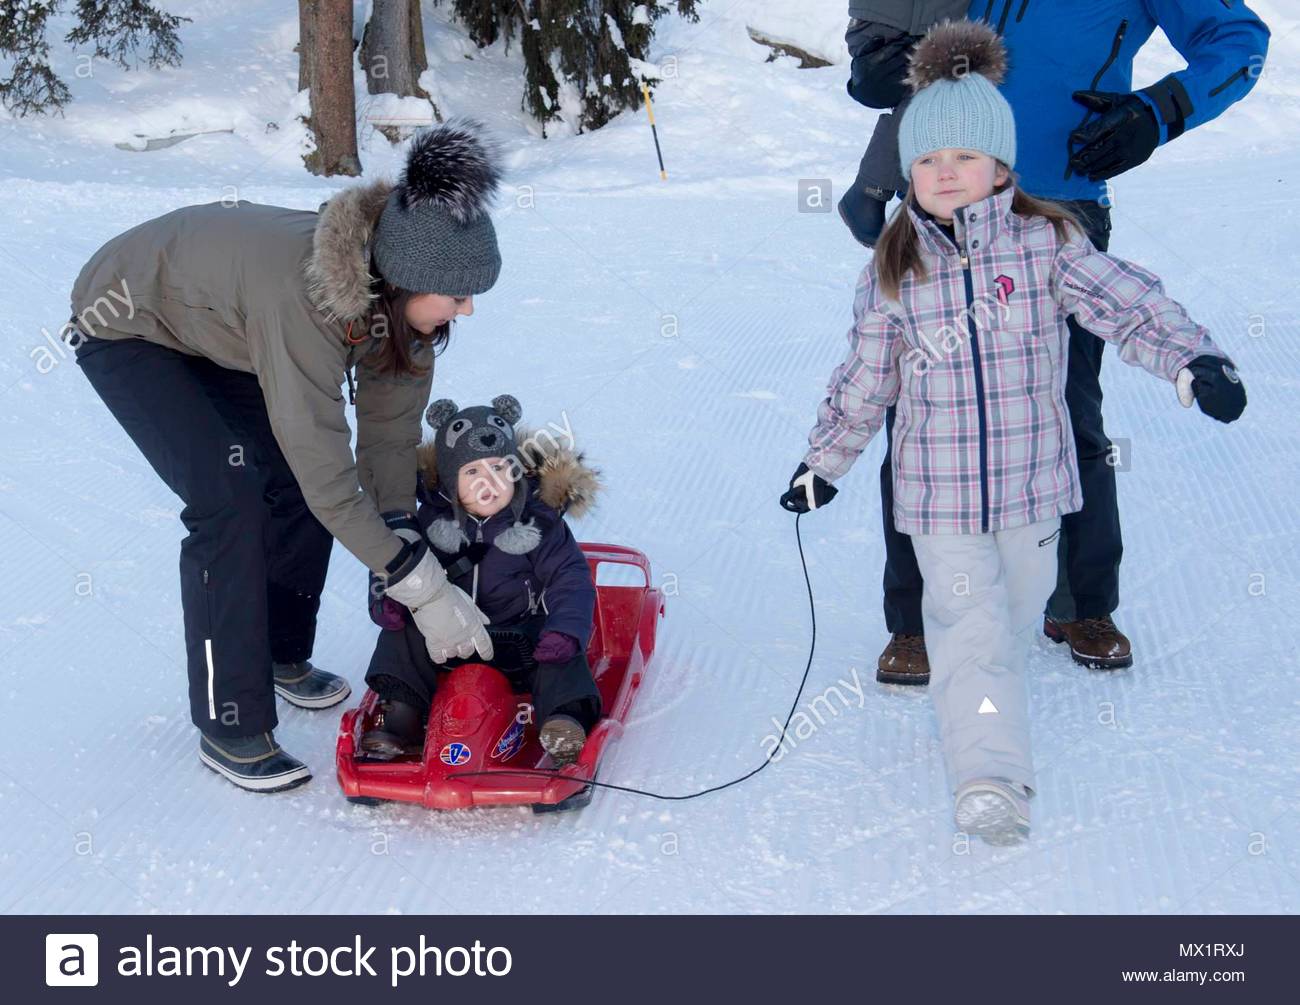 crown-princess-mary-prince-christian-princess-isabella-prince-vincent-princess-josephine-the-annual-photo-shoot-of-the-danish-crown-prince-couple-and-children-in-verbier-code-03760mh-MX1RXJ.jpg